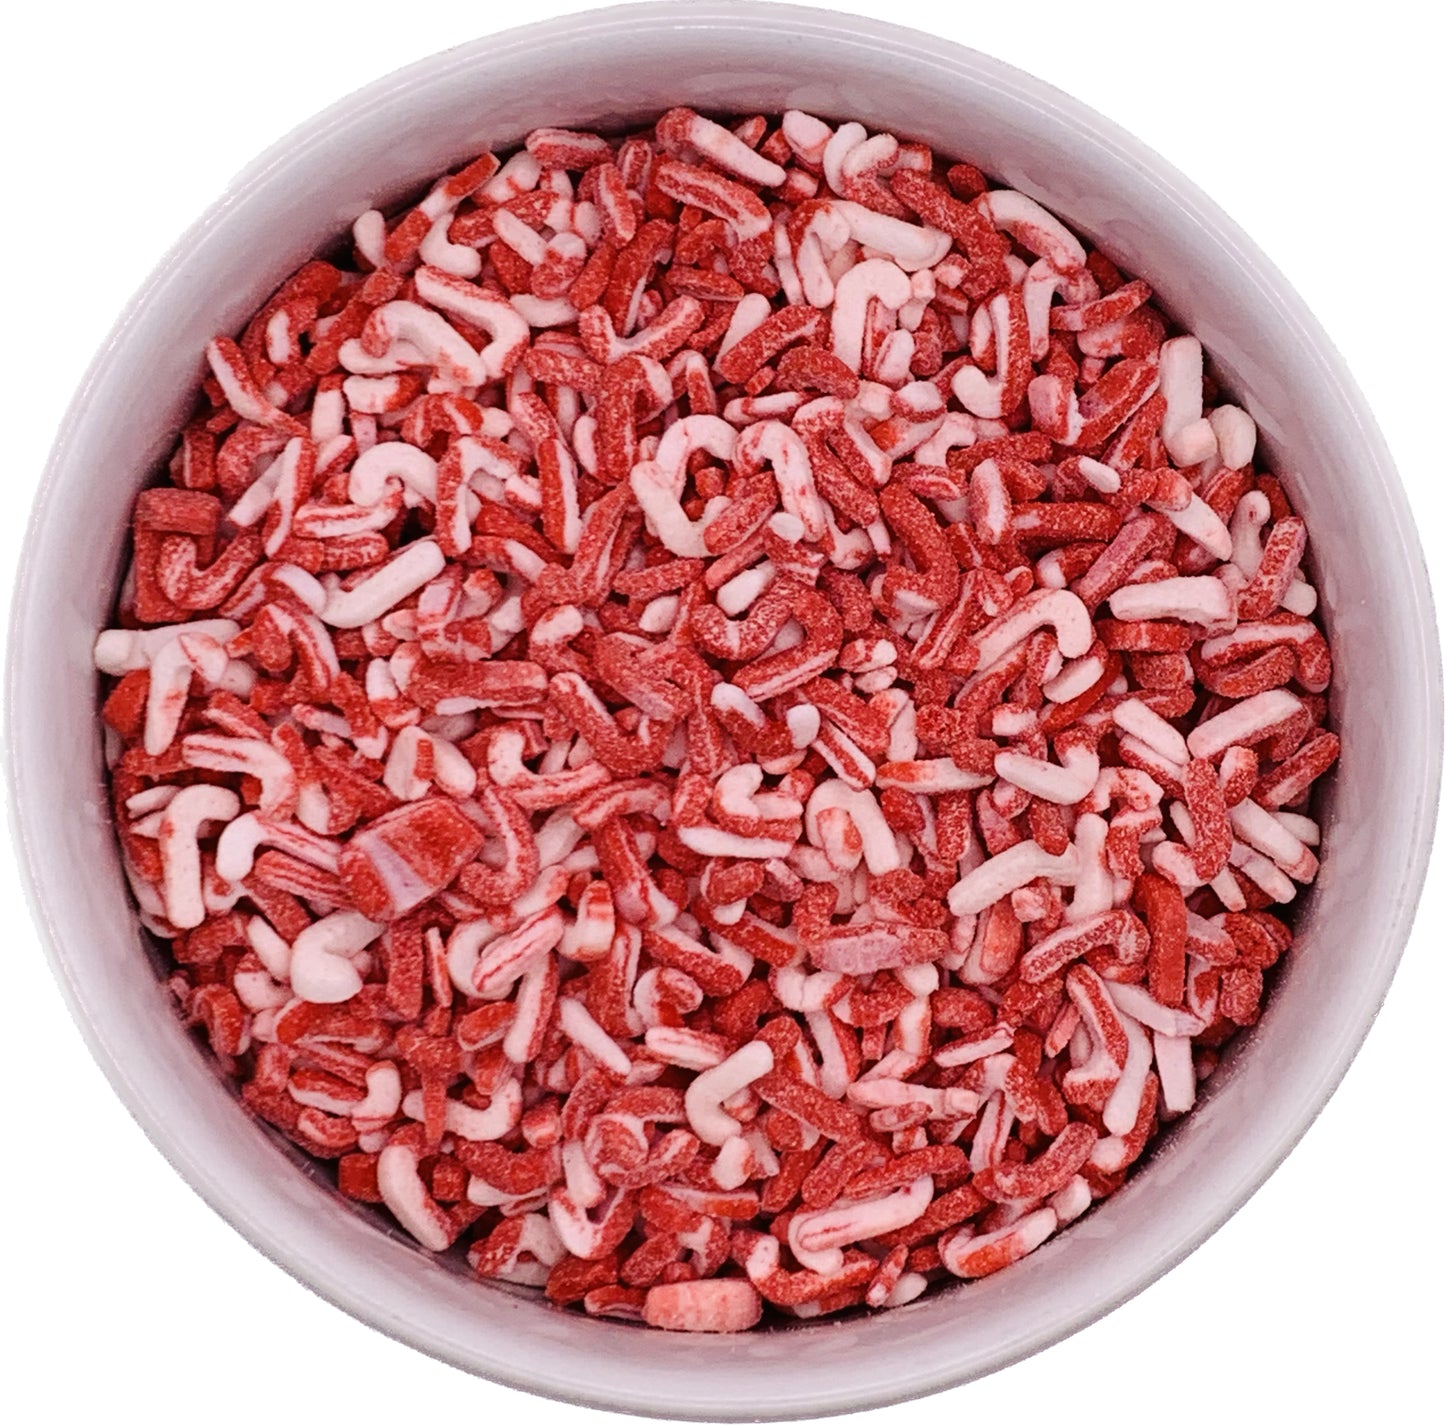 Candy Cane Sprinkles in a Bowl